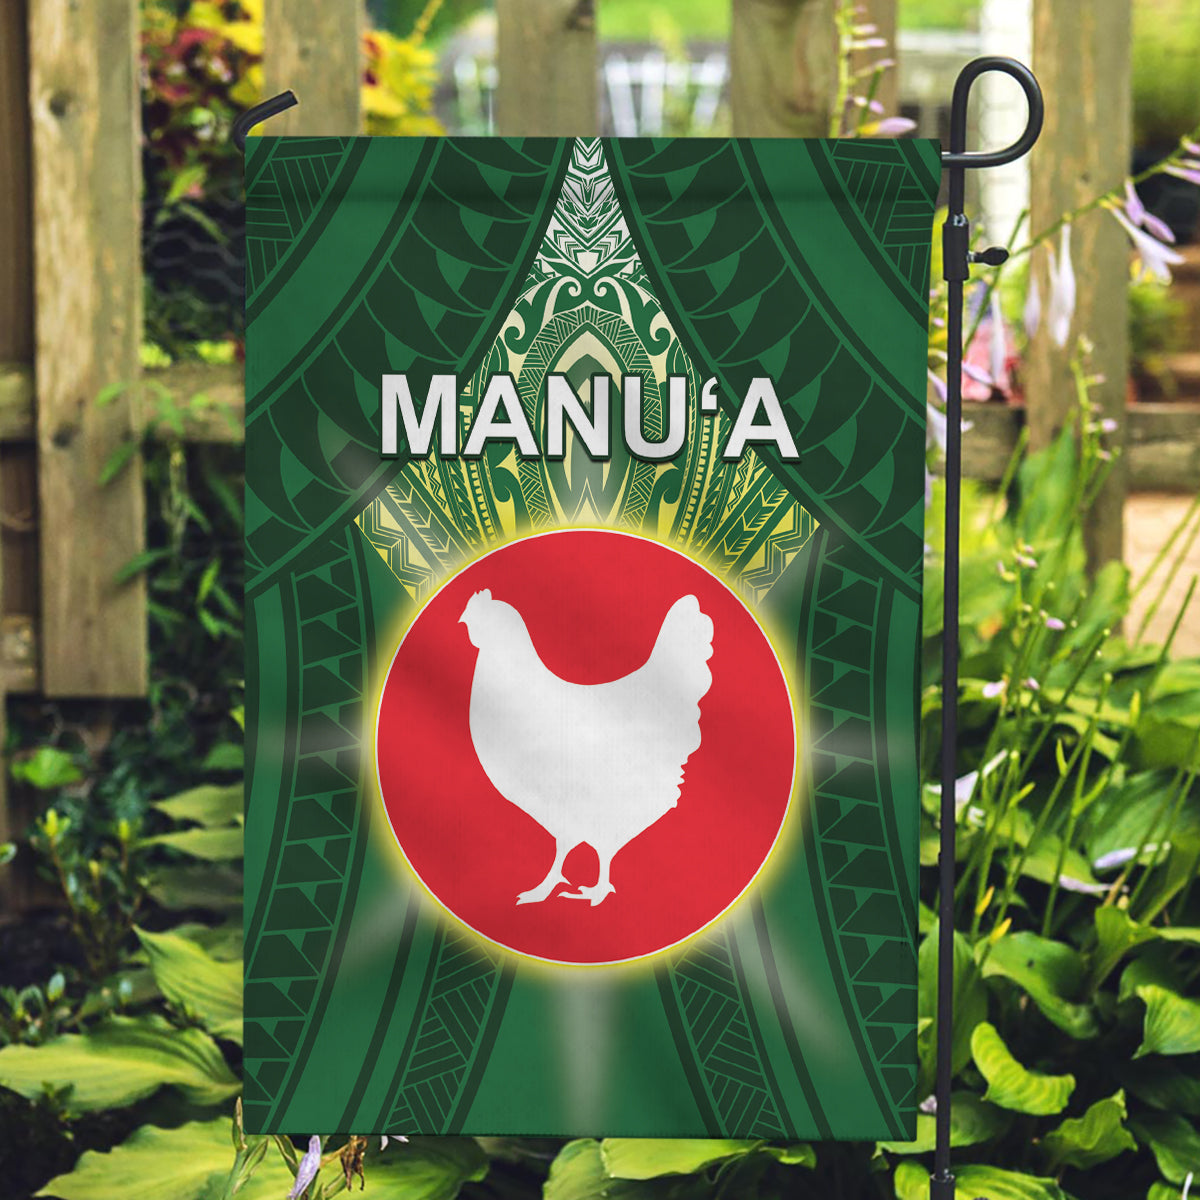 American Samoa Manu'a Cession Day Garden Flag With Polynesian Pattern